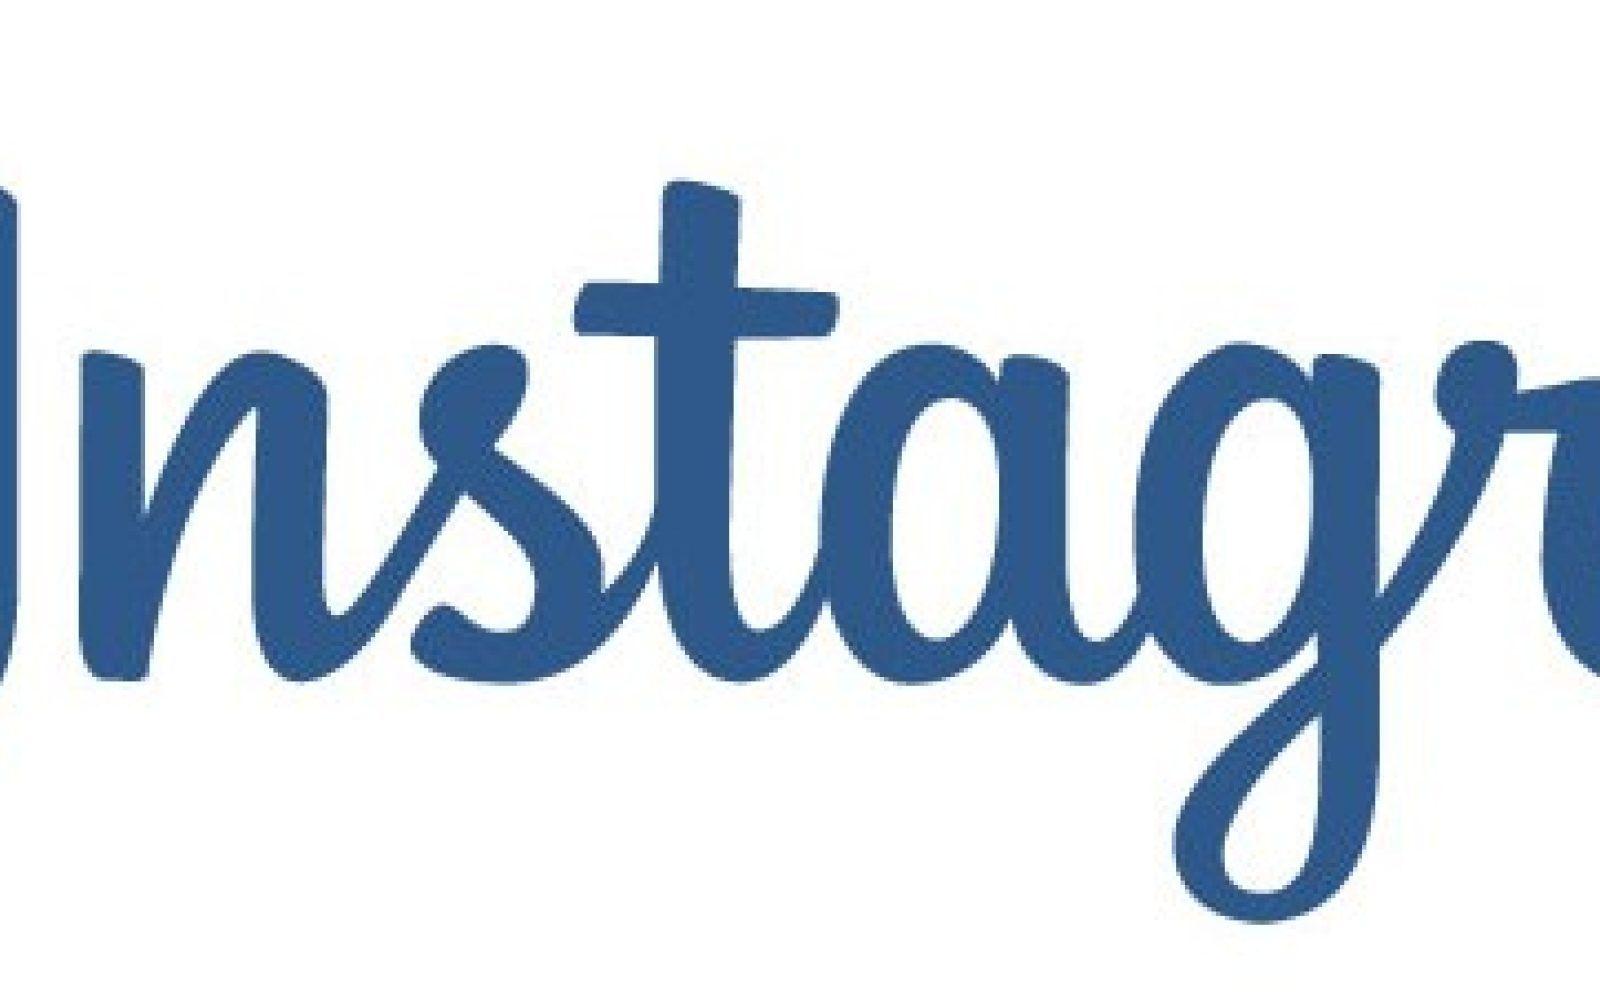 Instagram Official Logo - Instagram Rolling Out Support For High Res Image On IOS And Android